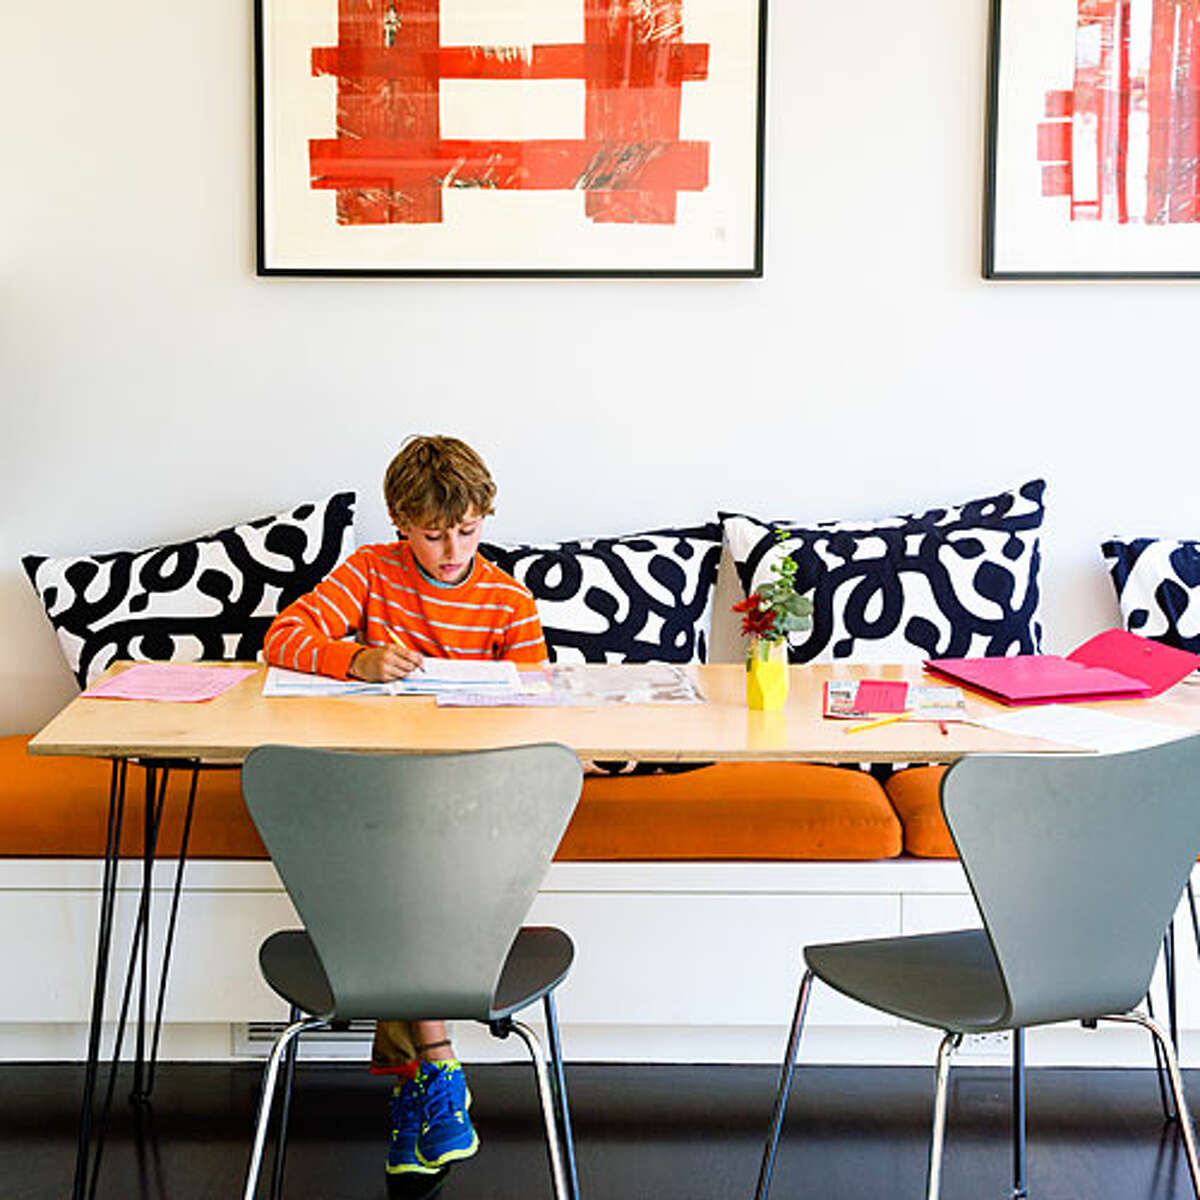 Smart design Of course, green design was a given when he and his wife, Margot Beall, started remodeling the San Francisco Edwardian they share with their kids. It needed a kitchen update, a family room, and a more open layout. "I wanted to be able to cook in the kitchen while watching the kids in the backyard and family room," says Beall. "I envisioned them doing homework at the breakfast table." But first, they had to make room for it. An 11½-foot addition to the back of the house let them lengthen the galley kitchen. They also gained a modest family room that opens directly to the backyard, and a master suite with a deck and rooftop garden on the top level. Behind the scenes, King reworked the home’s infrastructure for maximum energy efficiency. Even better than the extra square footage is the sense of openness. Airtight and long-lasting aluminum-clad windows now span the back façade, providing views of the yard from almost anywhere on the lower level. Now that’s genius.